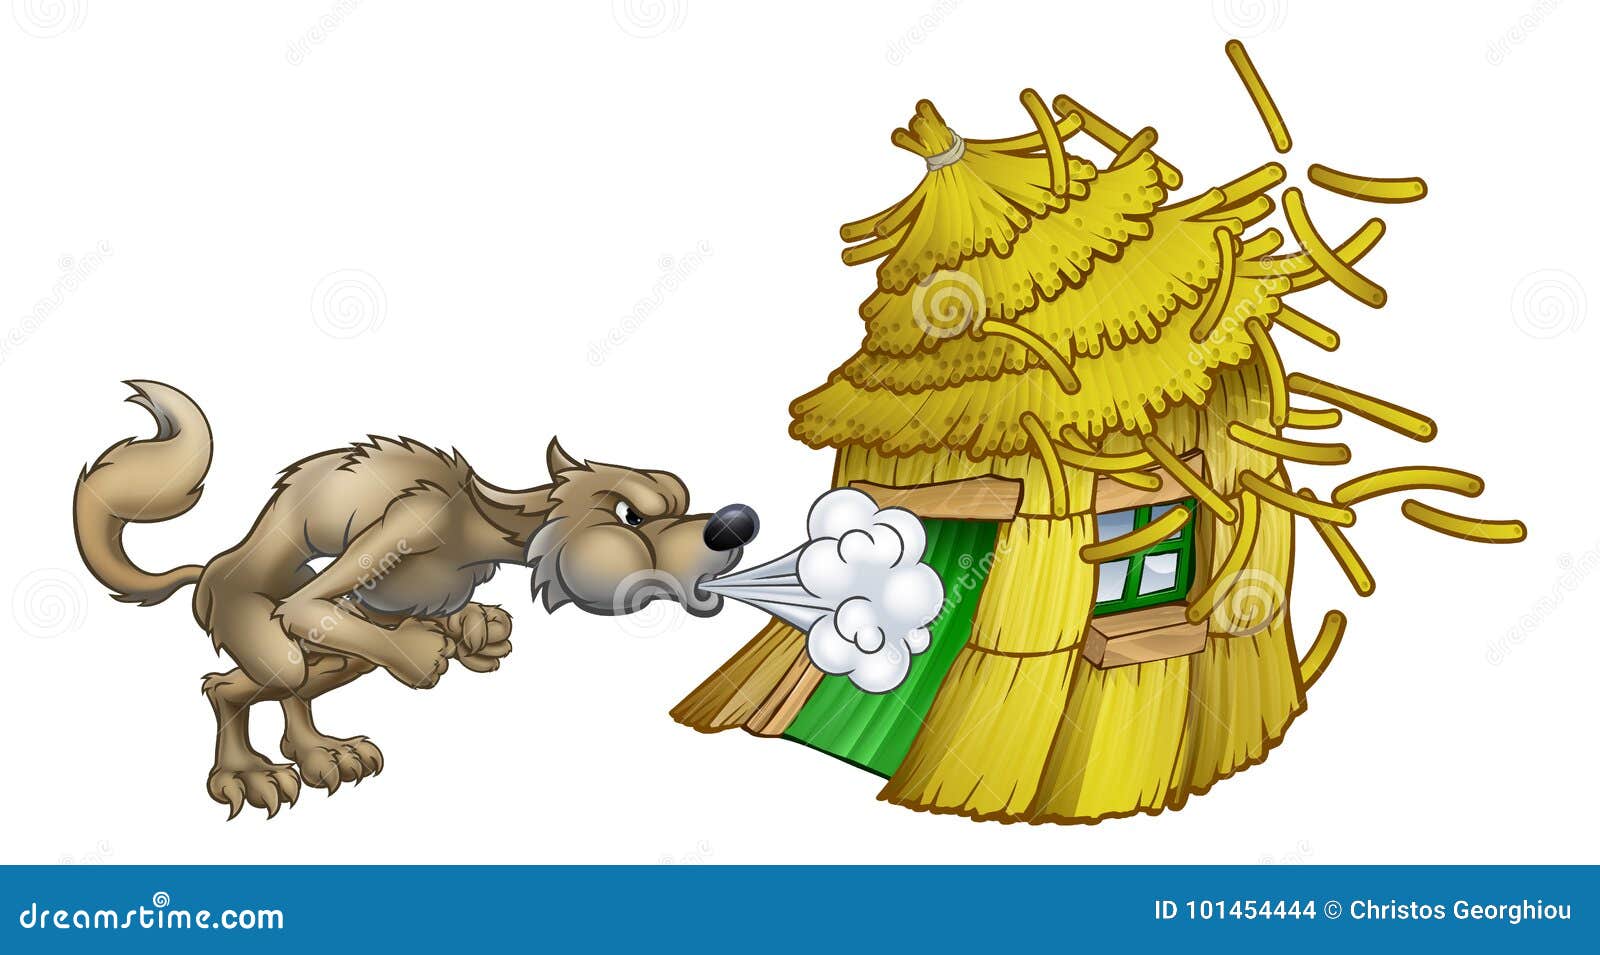 three little pigs big bad wolf blowing straw house